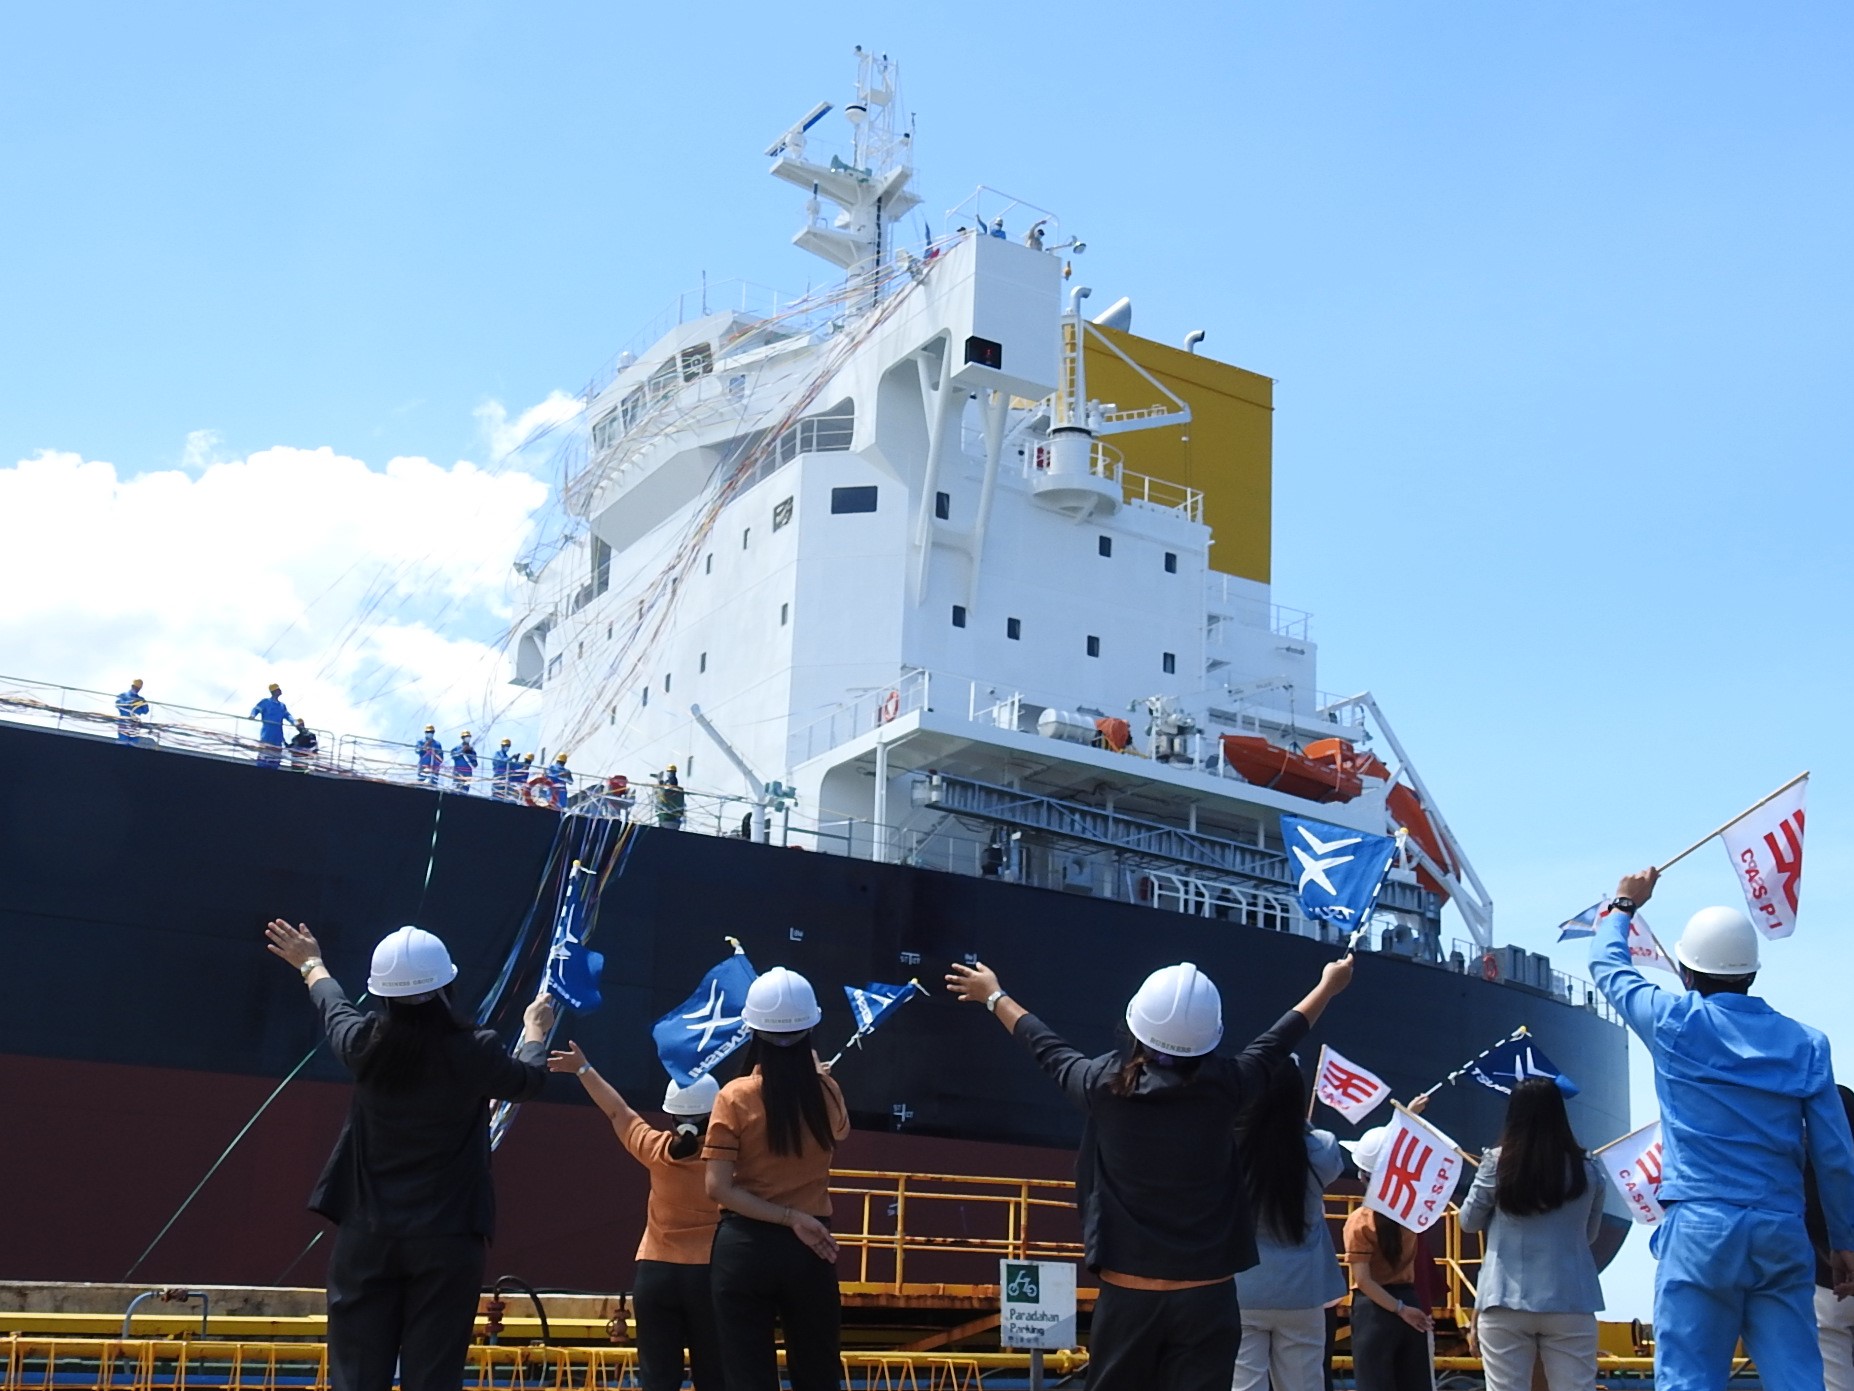 Sending off the completed ship